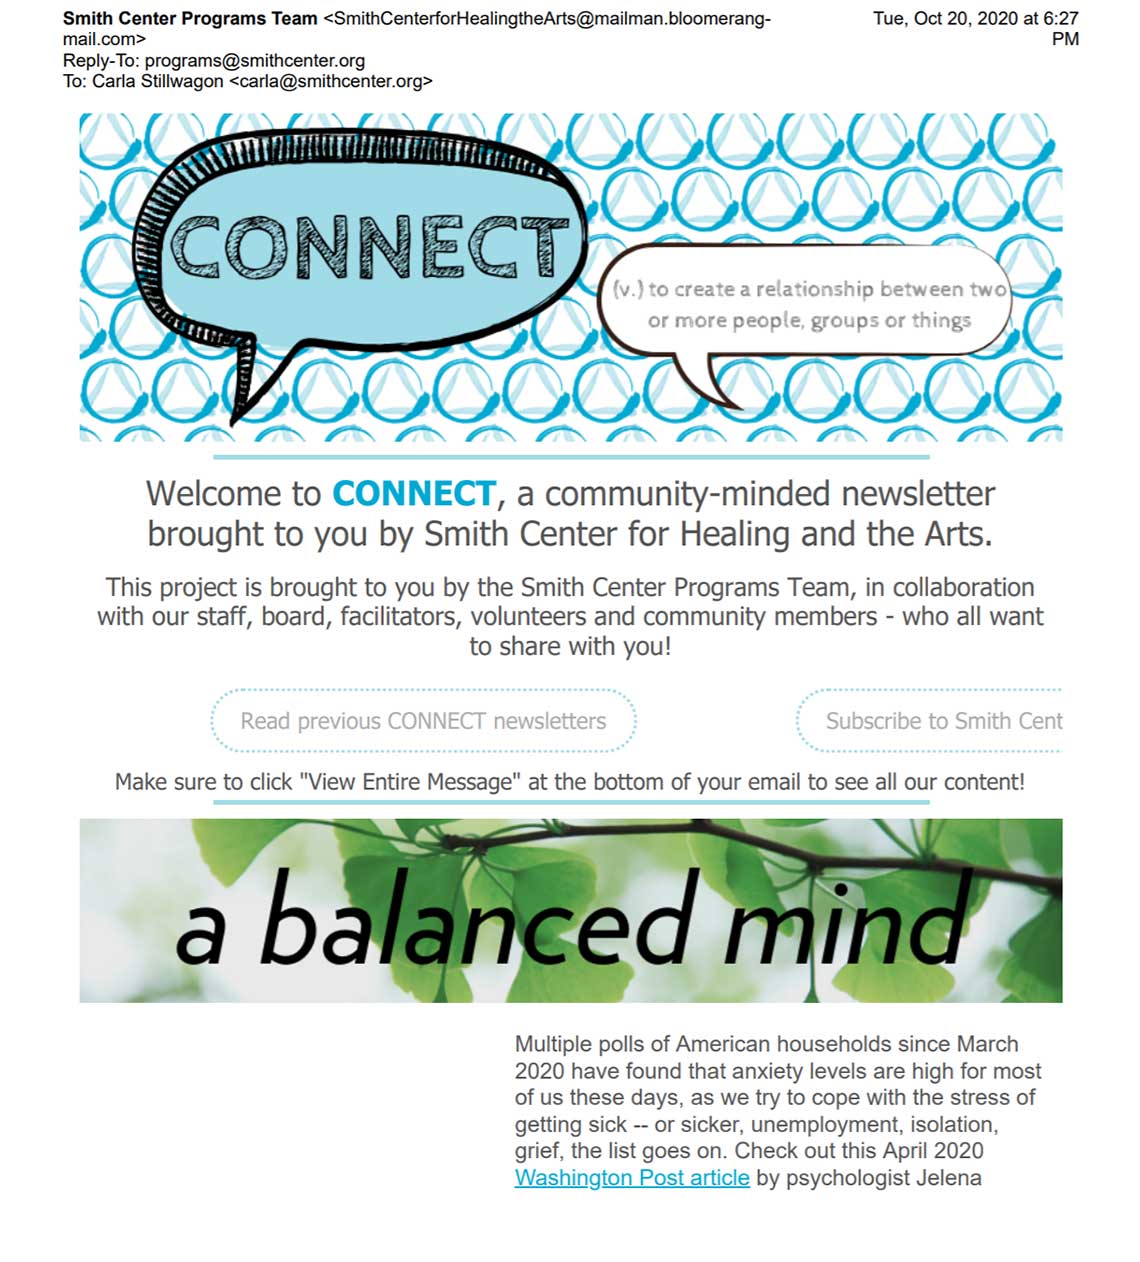 CONNECT Newsletter October 20, 2020